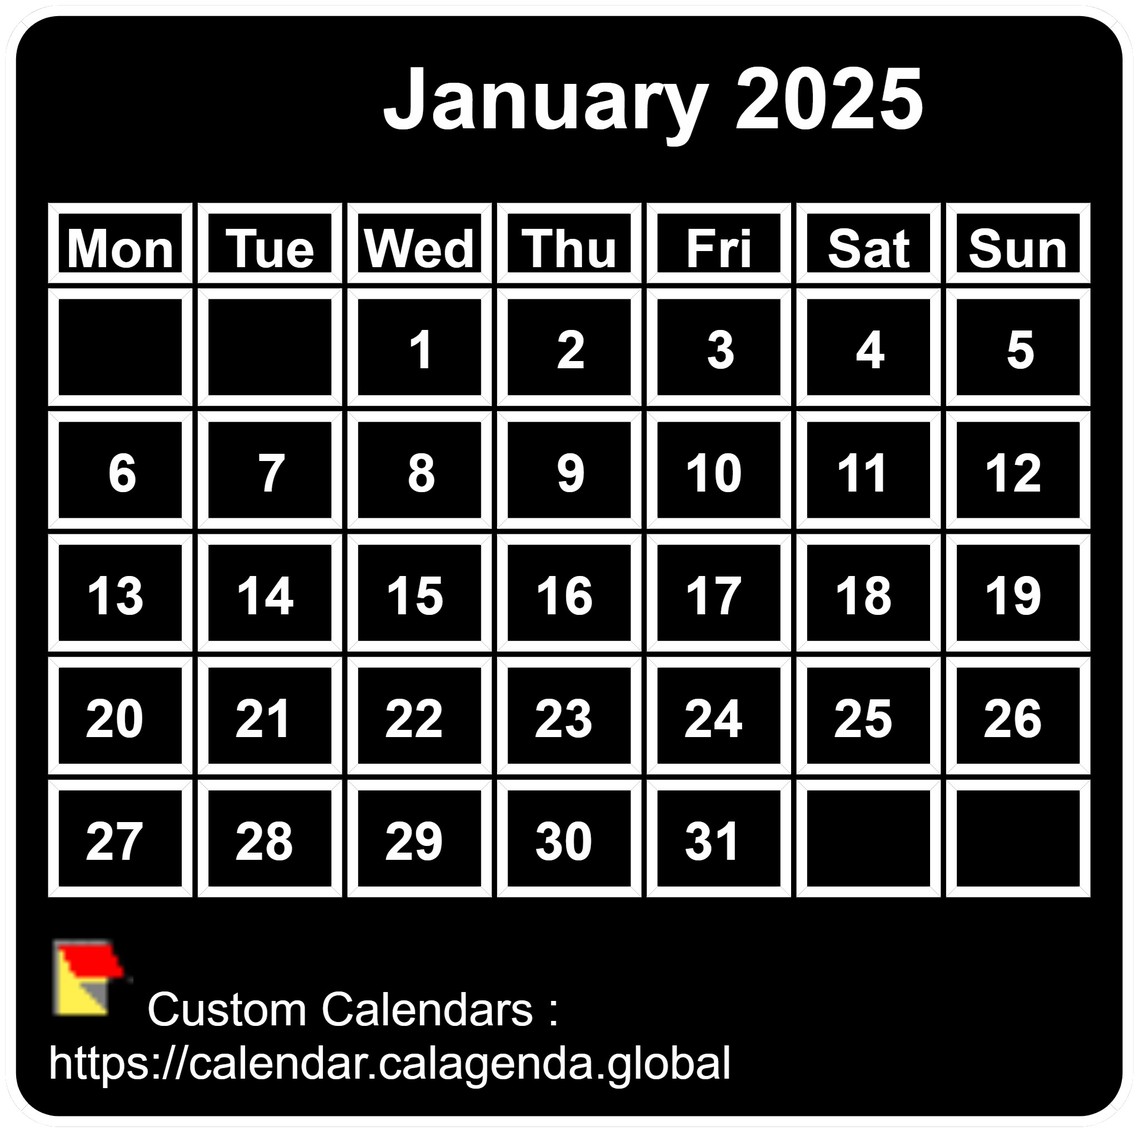 Calendar monthly 2025 to print, black background, tiny size, pocket size, special wallet